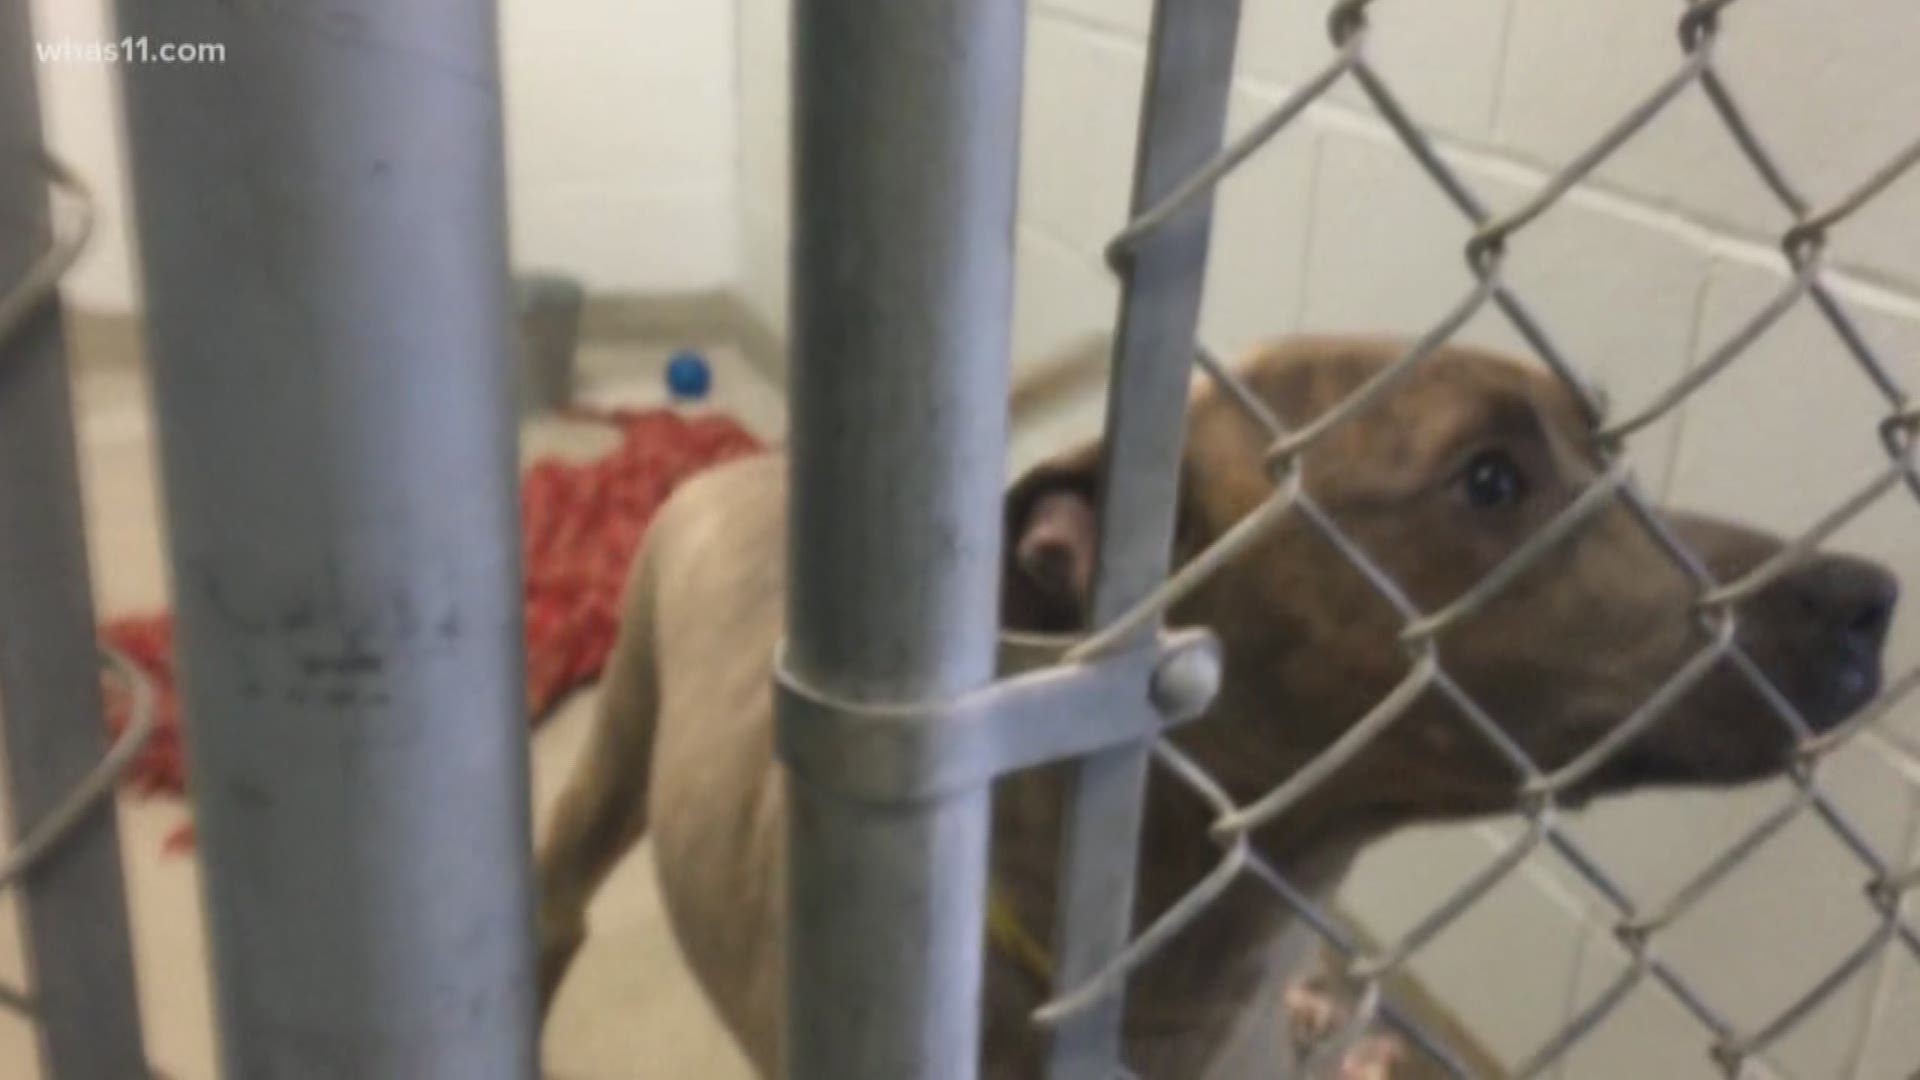 An Indiana animal shelter closed for two weeks because of allegations of misconduct by former employees is ready to start over.